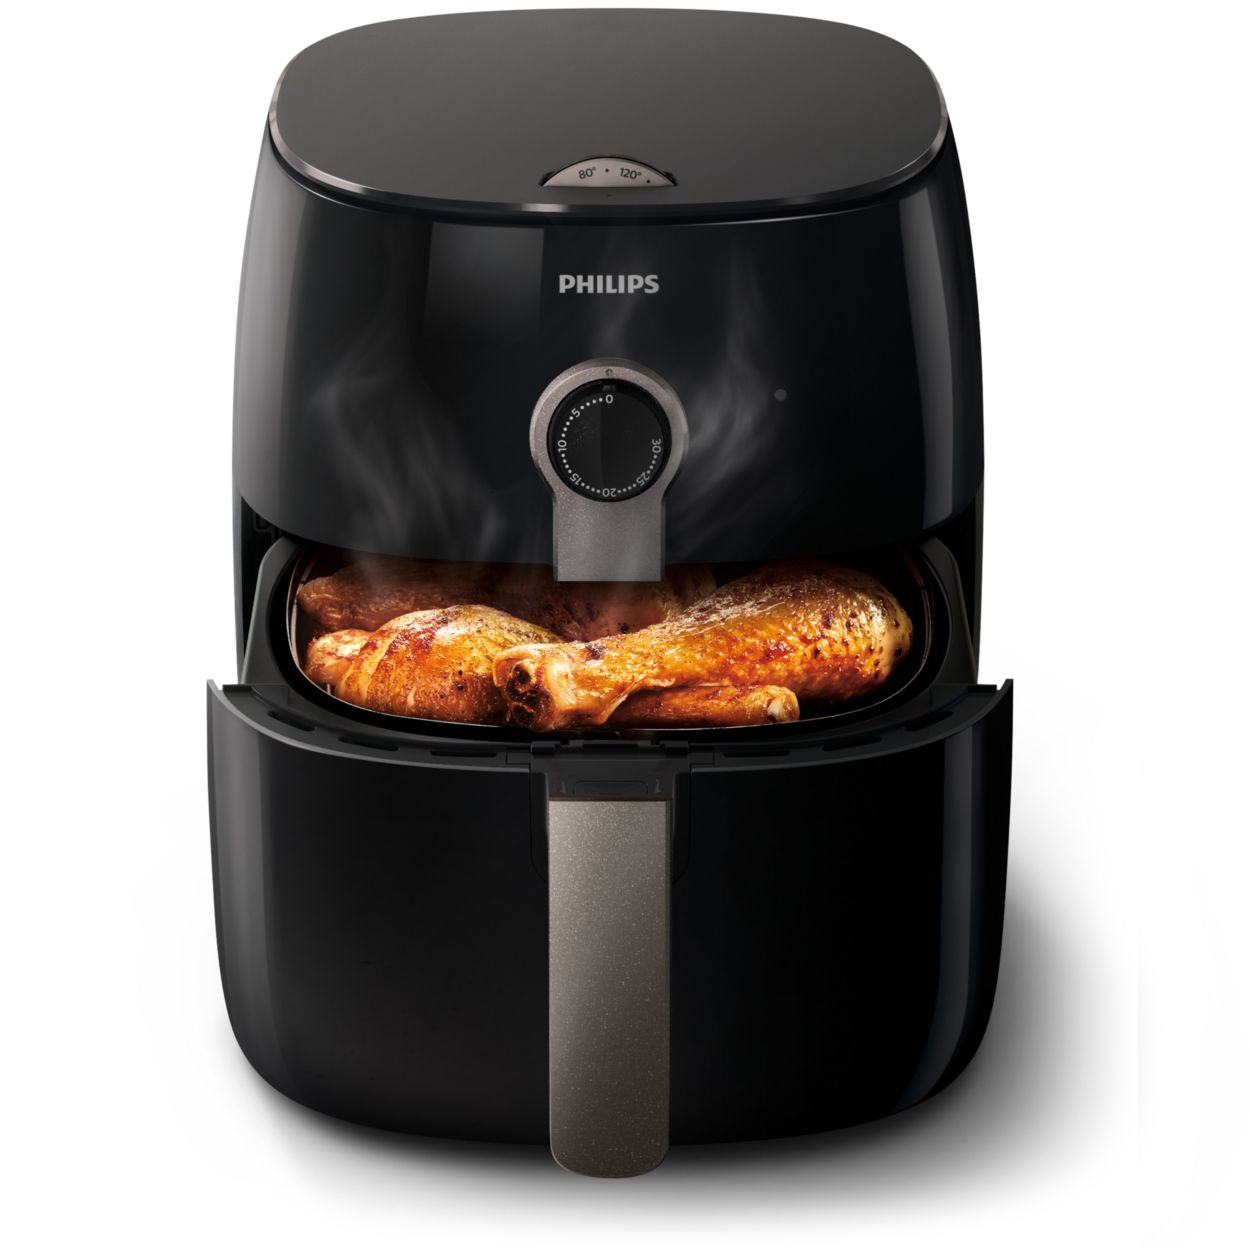 Product review: Philips airfryer